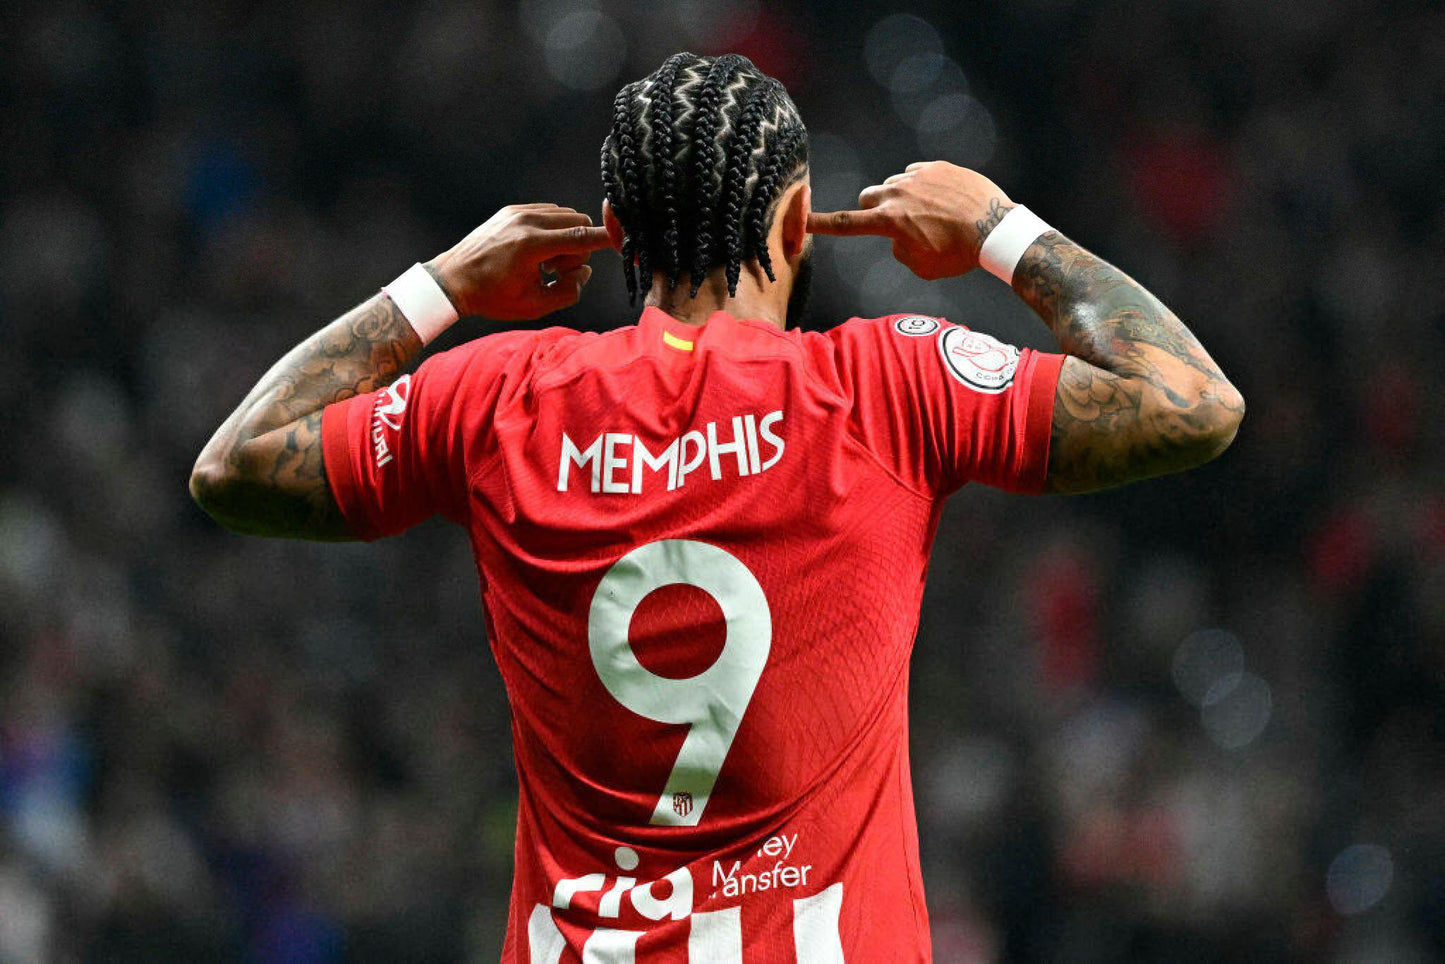 Memphis Depay Atletico Madrid 2023/24 Home Kit Adidas Authentic On-Field Player Version Soccer Jersey - Red